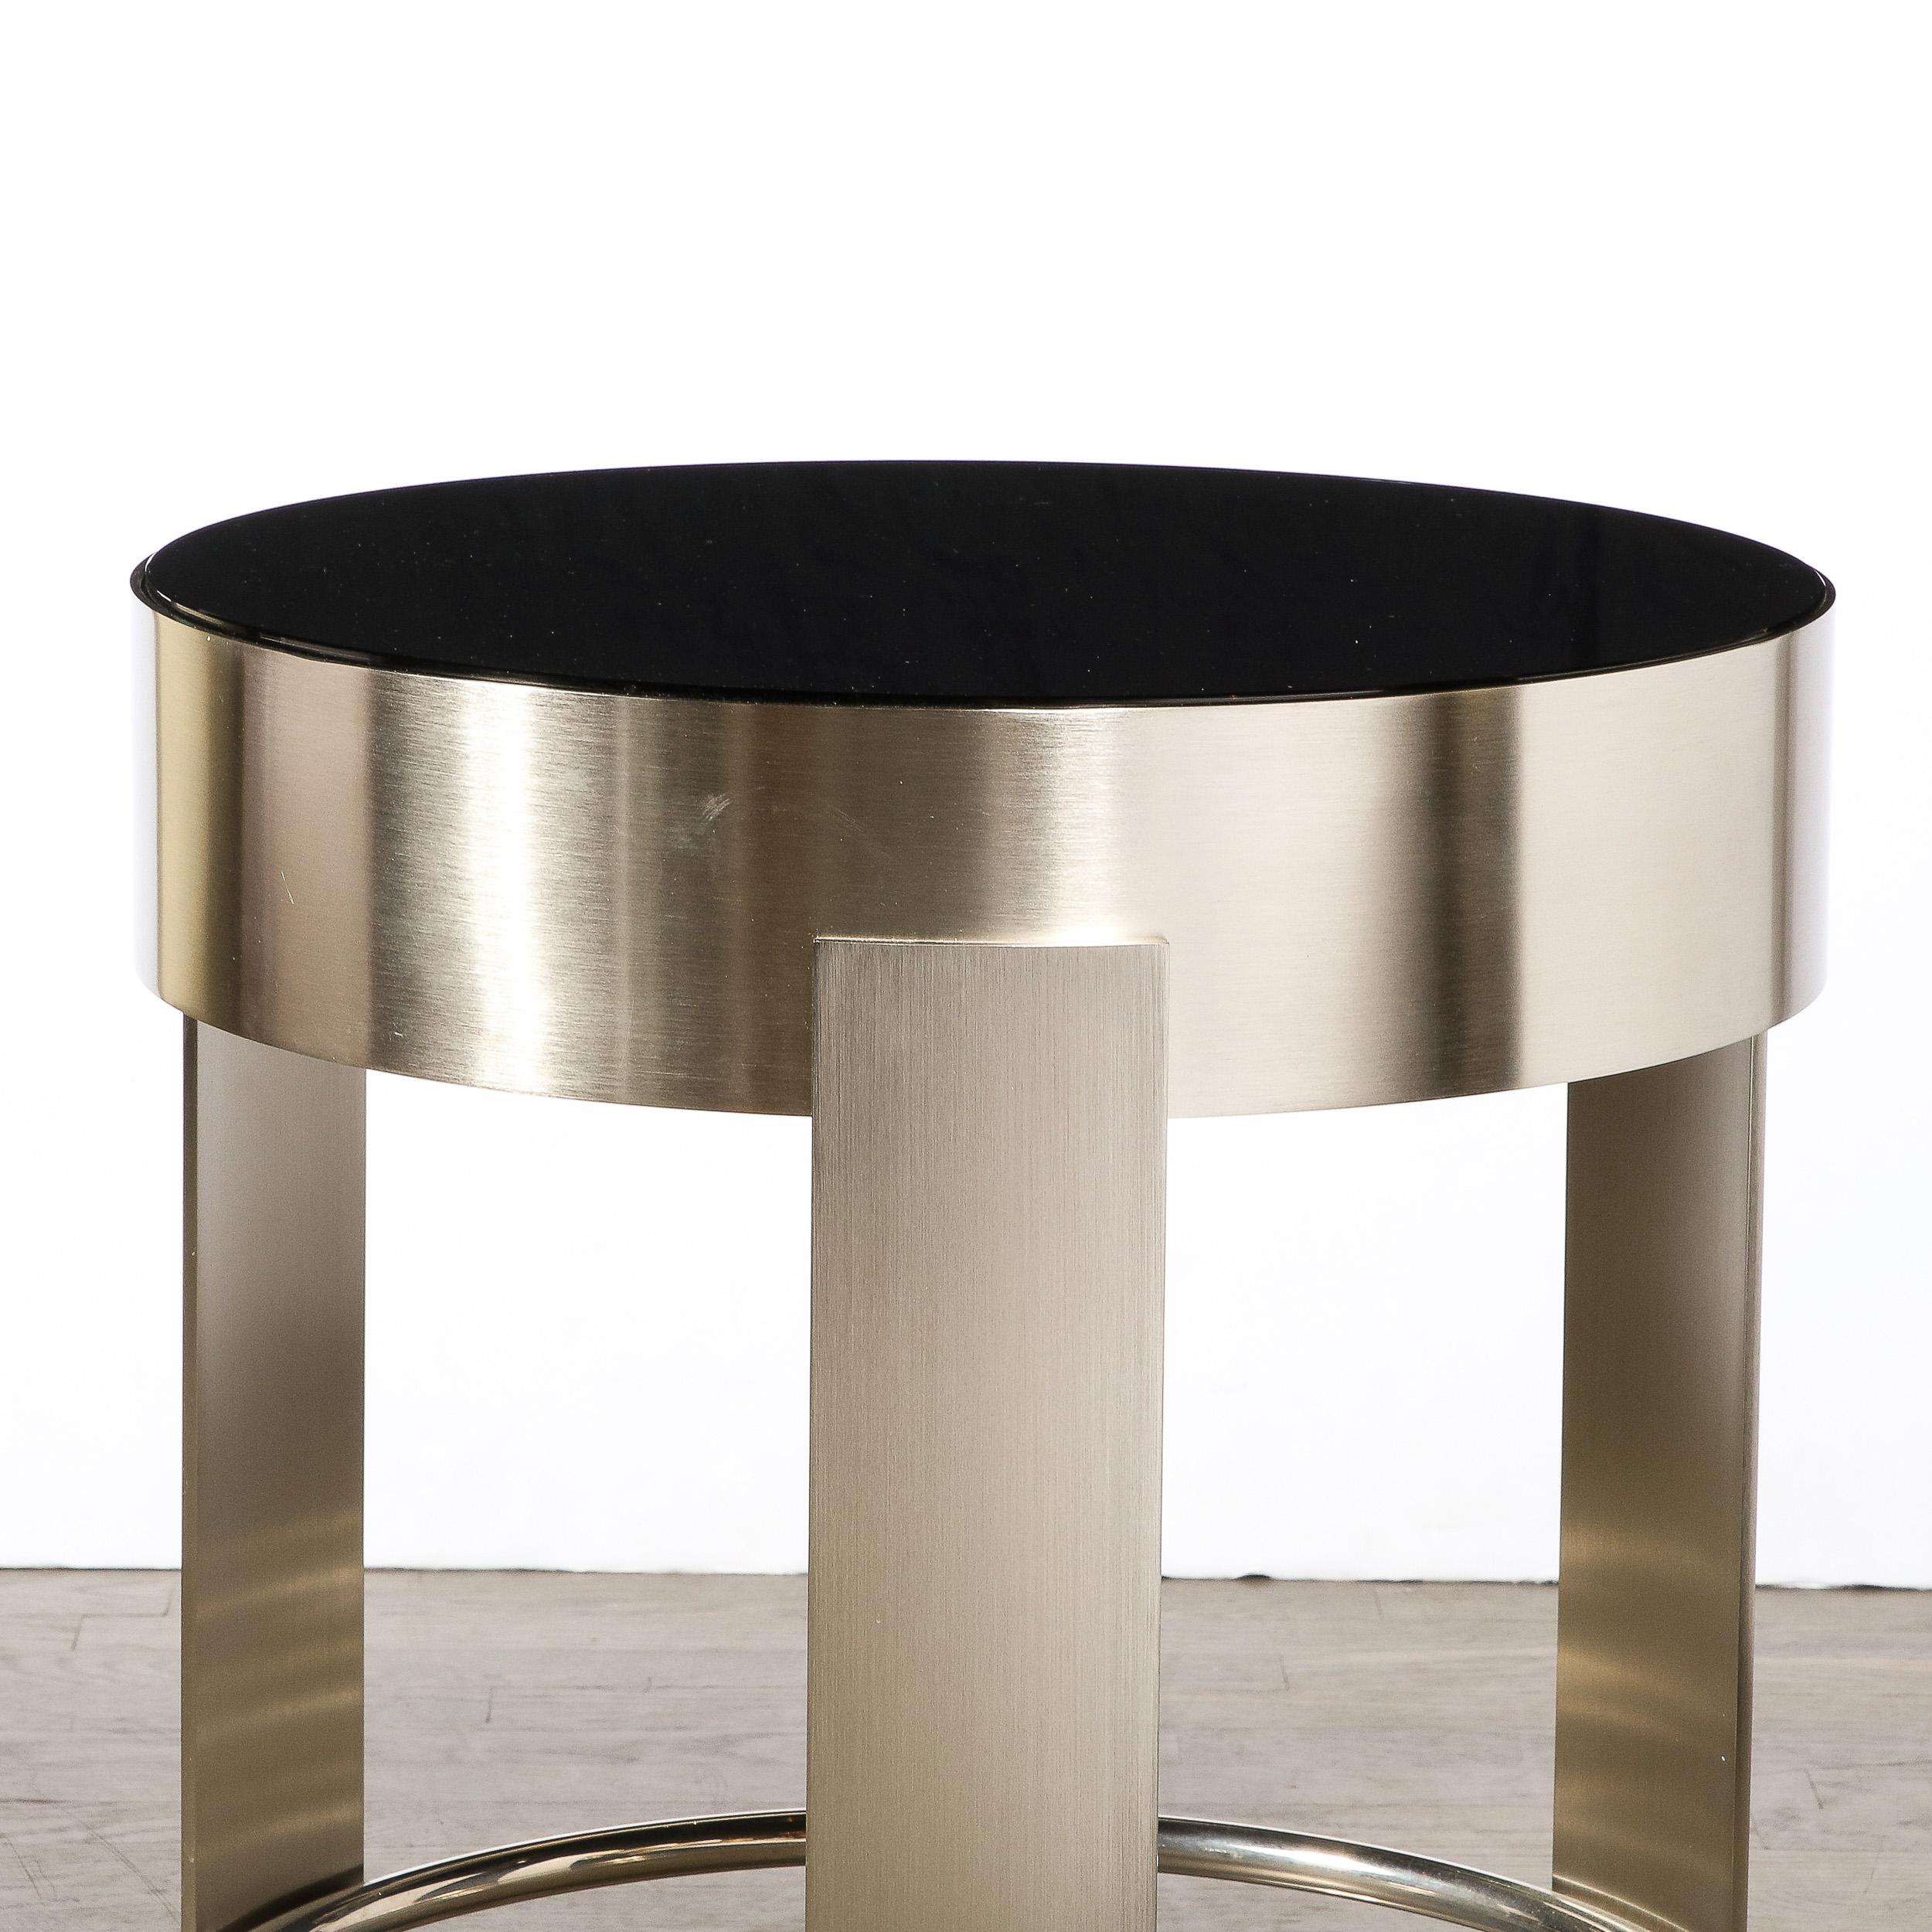 Art Deco Revival Occasional Table in Brushed Nickel with Polished Banding 4